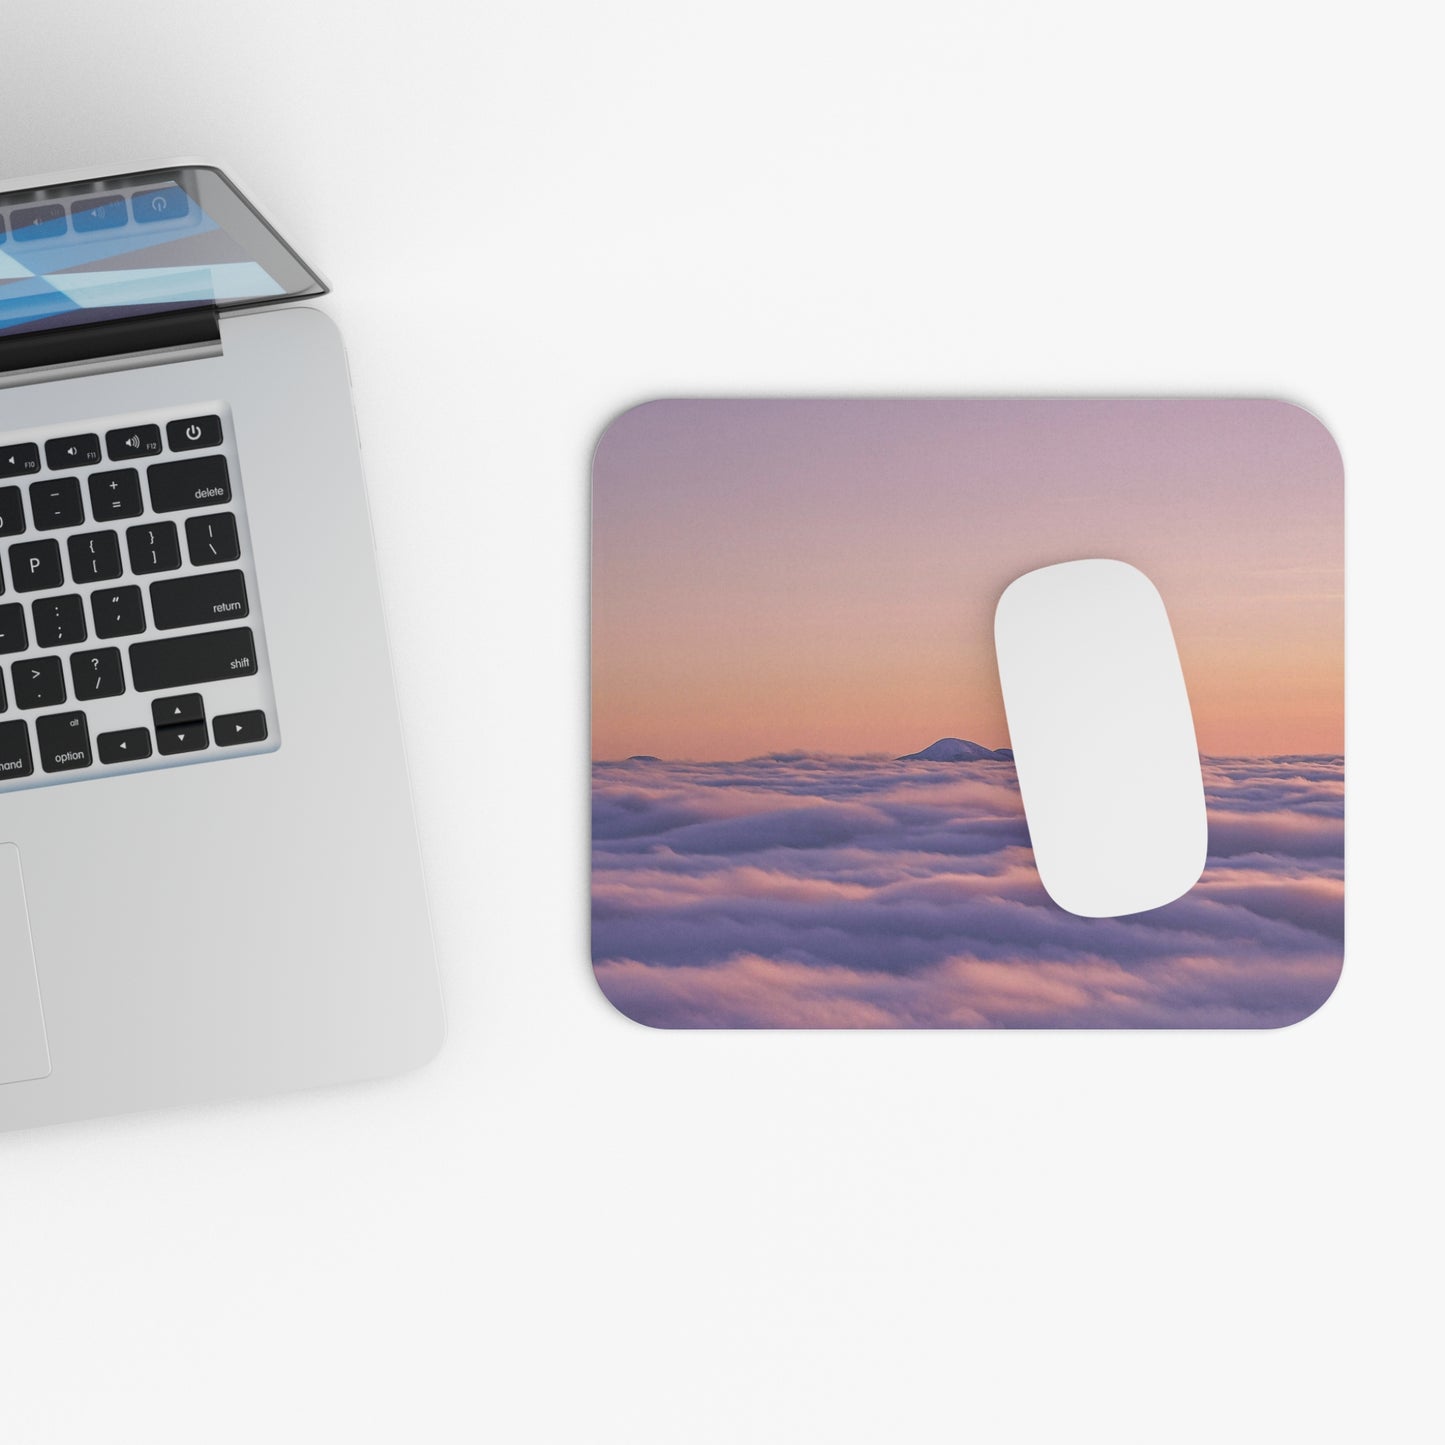 Above the Clouds Mouse Pad